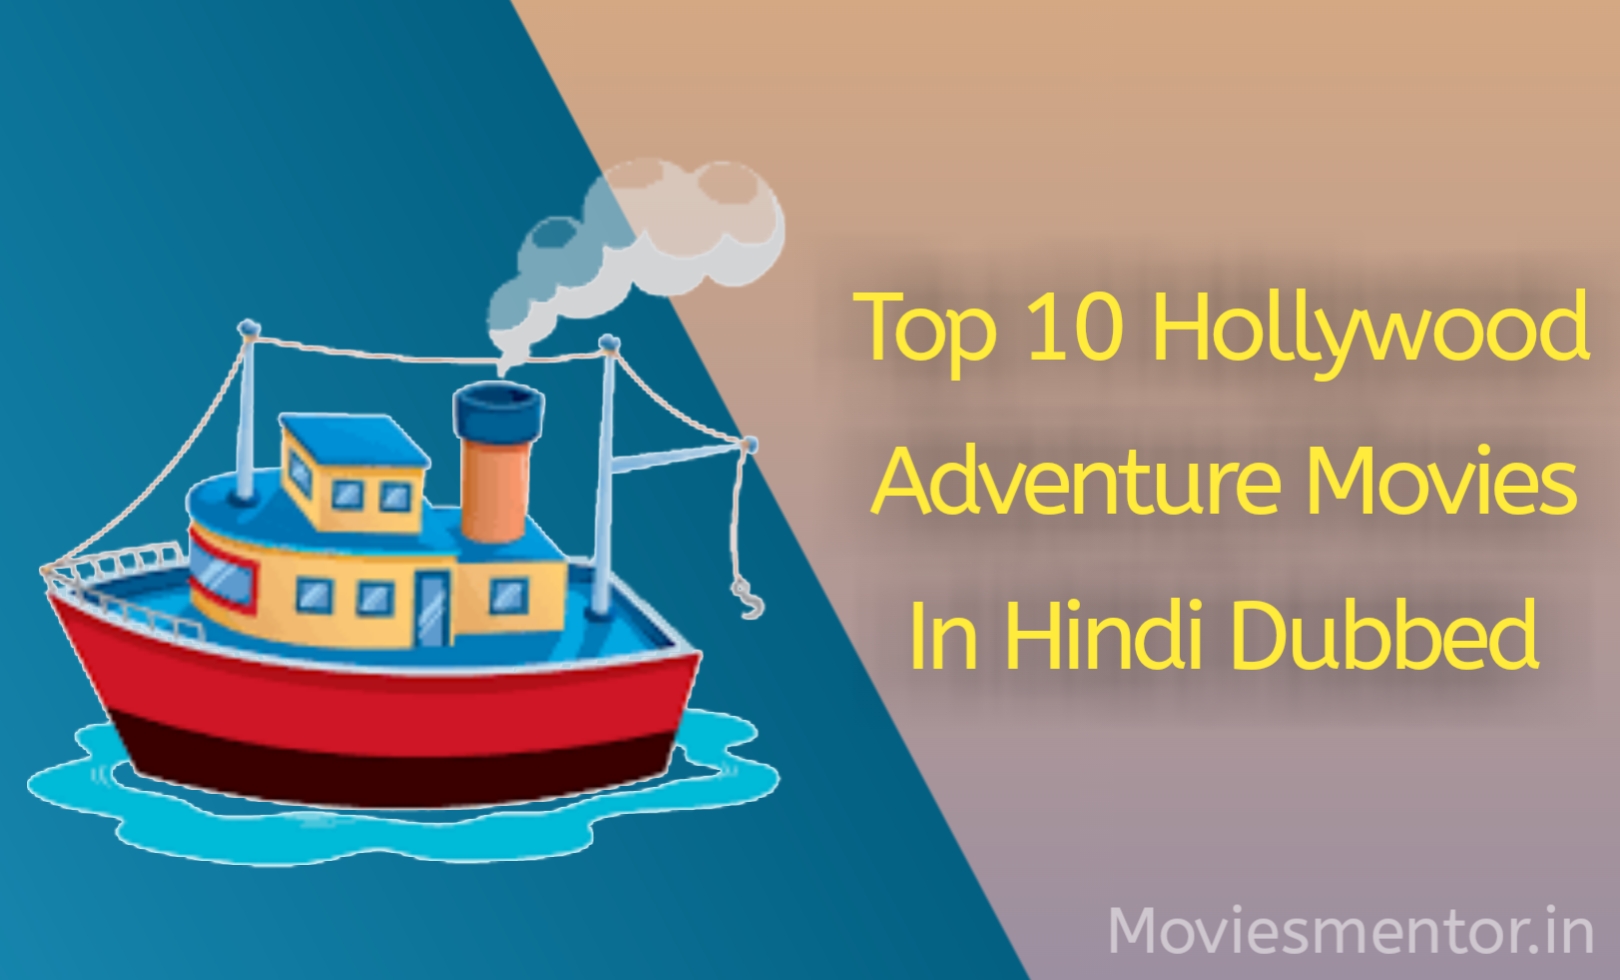 Top 10 Hollywood Adventure Movies In Hindi Dubbed